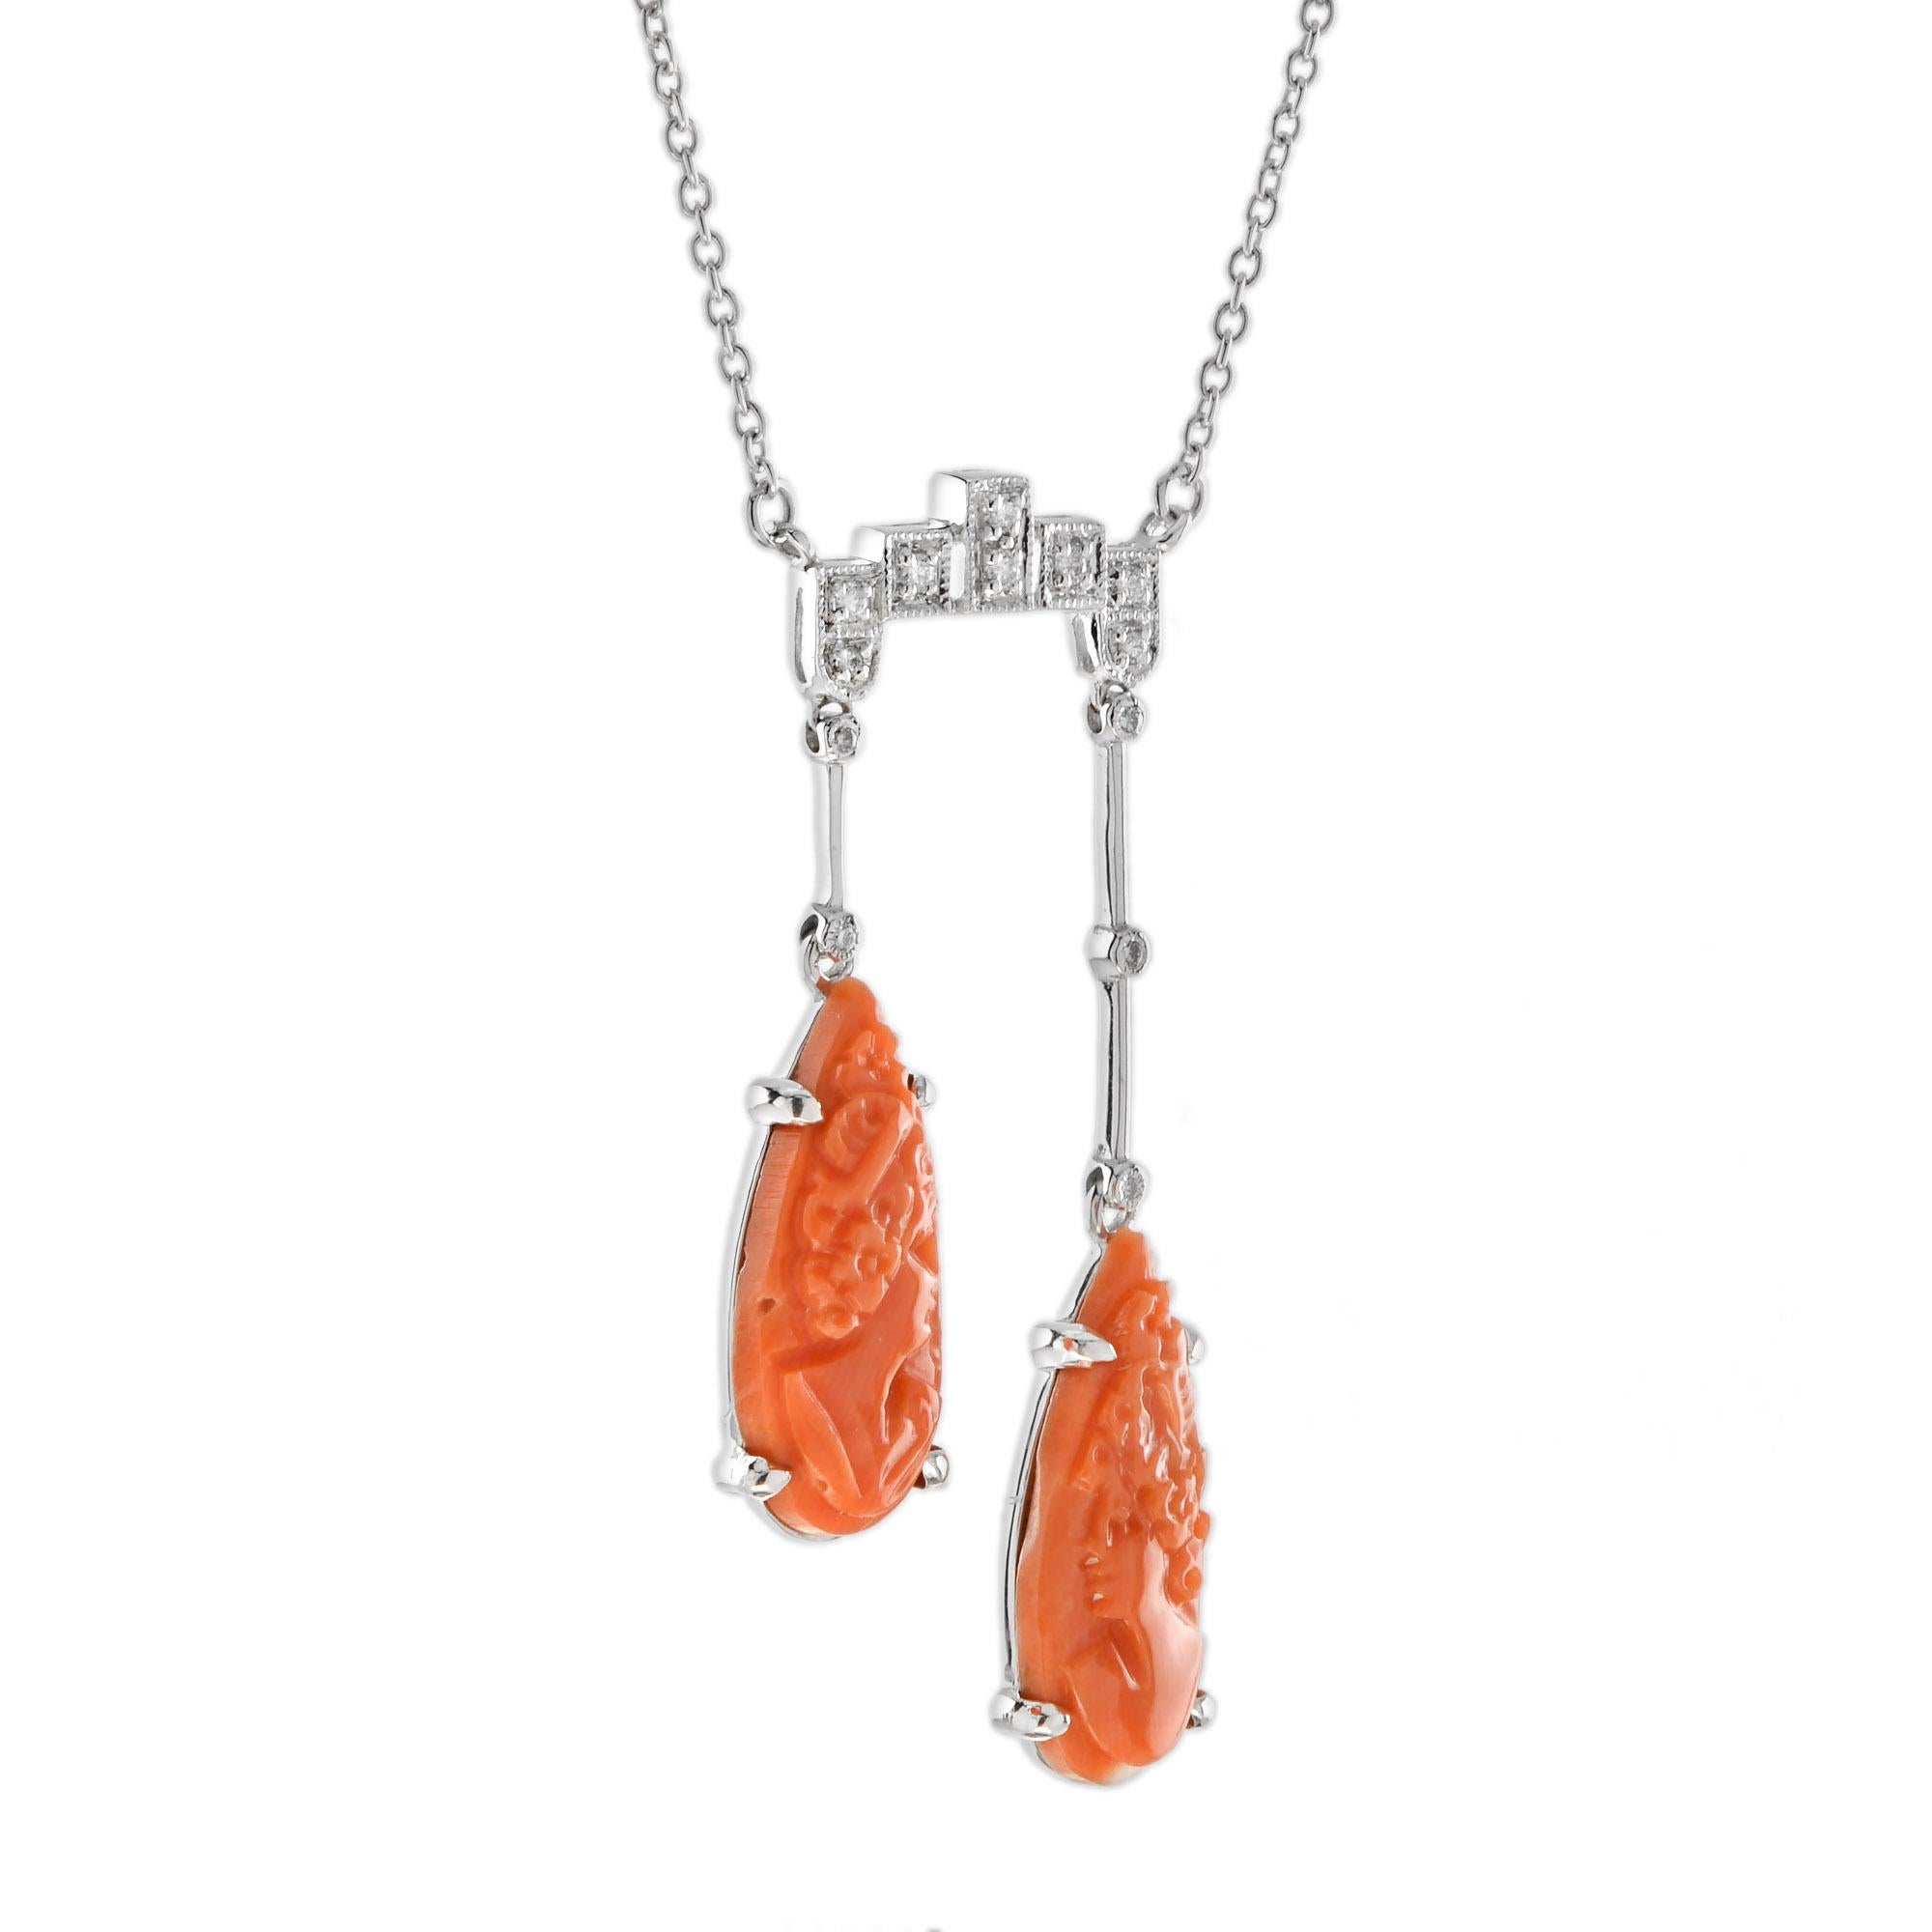 An antique design negligee necklace, so delicate and elegant in its beauty. This style necklace became popular at the turn of the century. It’s features cameo carved coral  suspended from the shimmering diamonds top part necklace with different